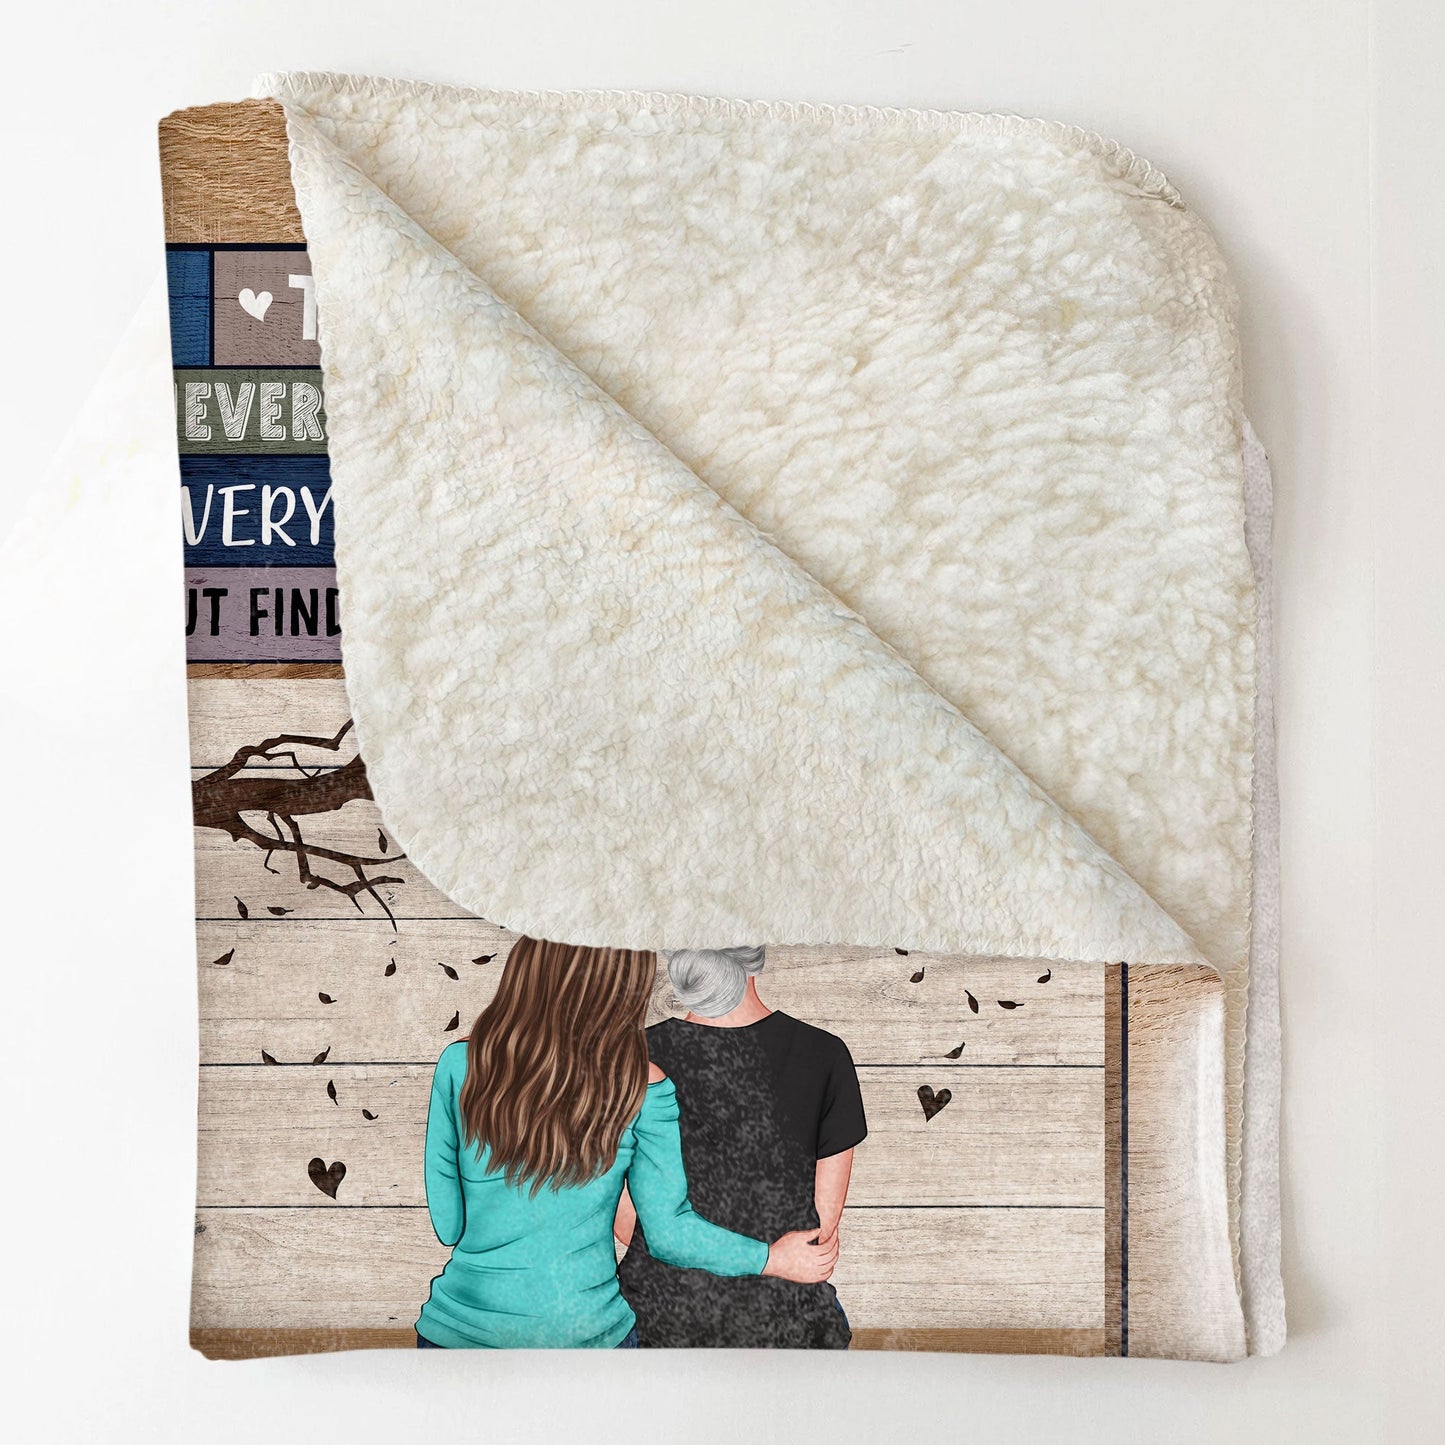 I Am So Proud Of You - Personalized Blanket - Christmas, Loving Gift For Your Daughters, Your Baby Girl